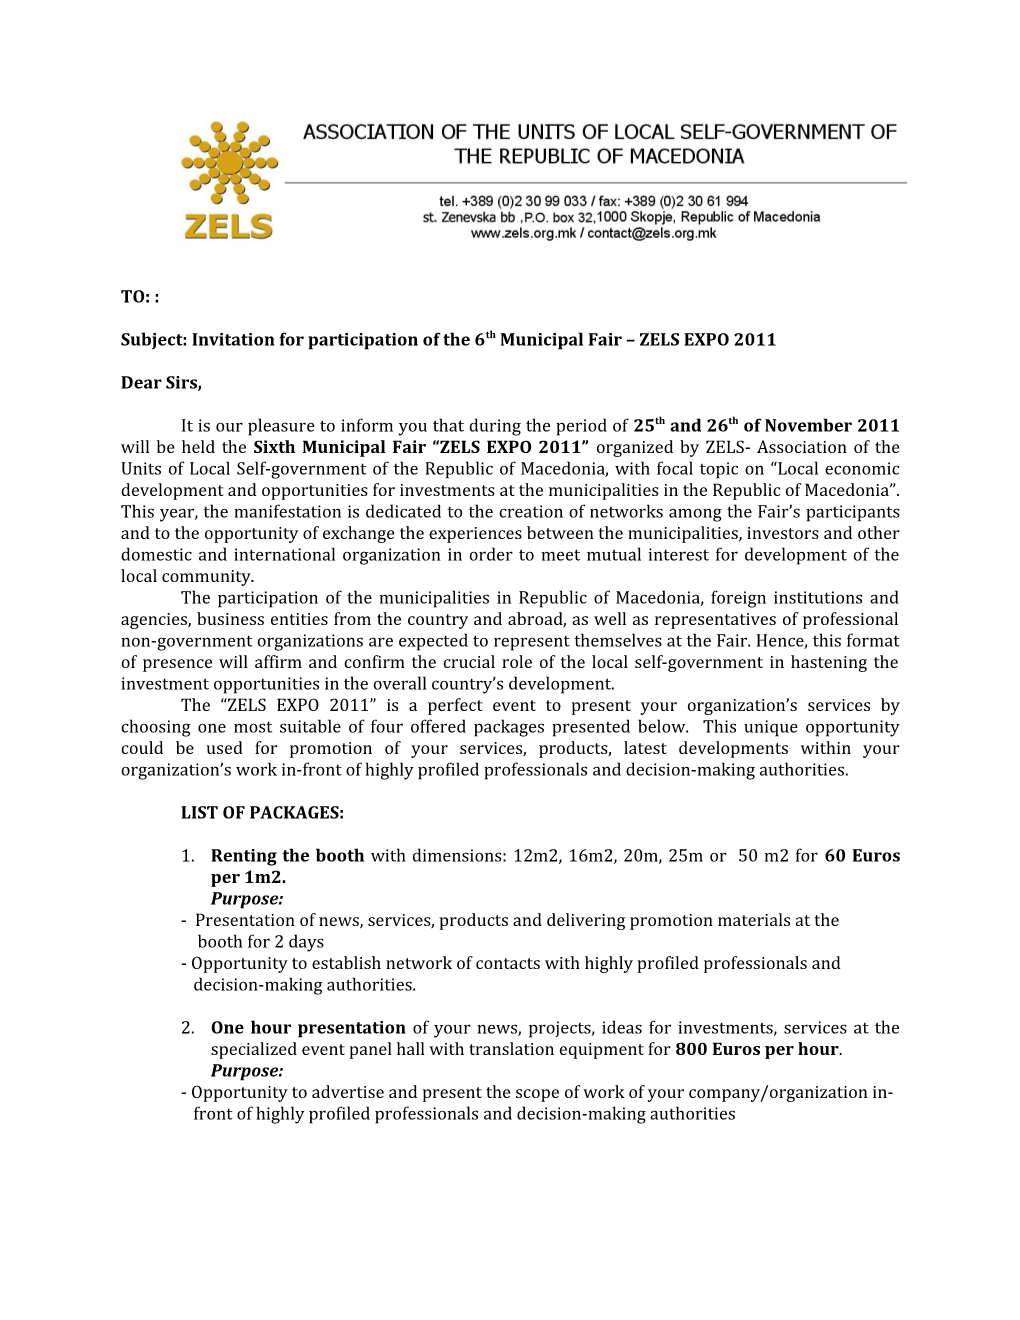 Subject: Invitation for Participation of the 6Th Municipal Fair ZELS EXPO 2011